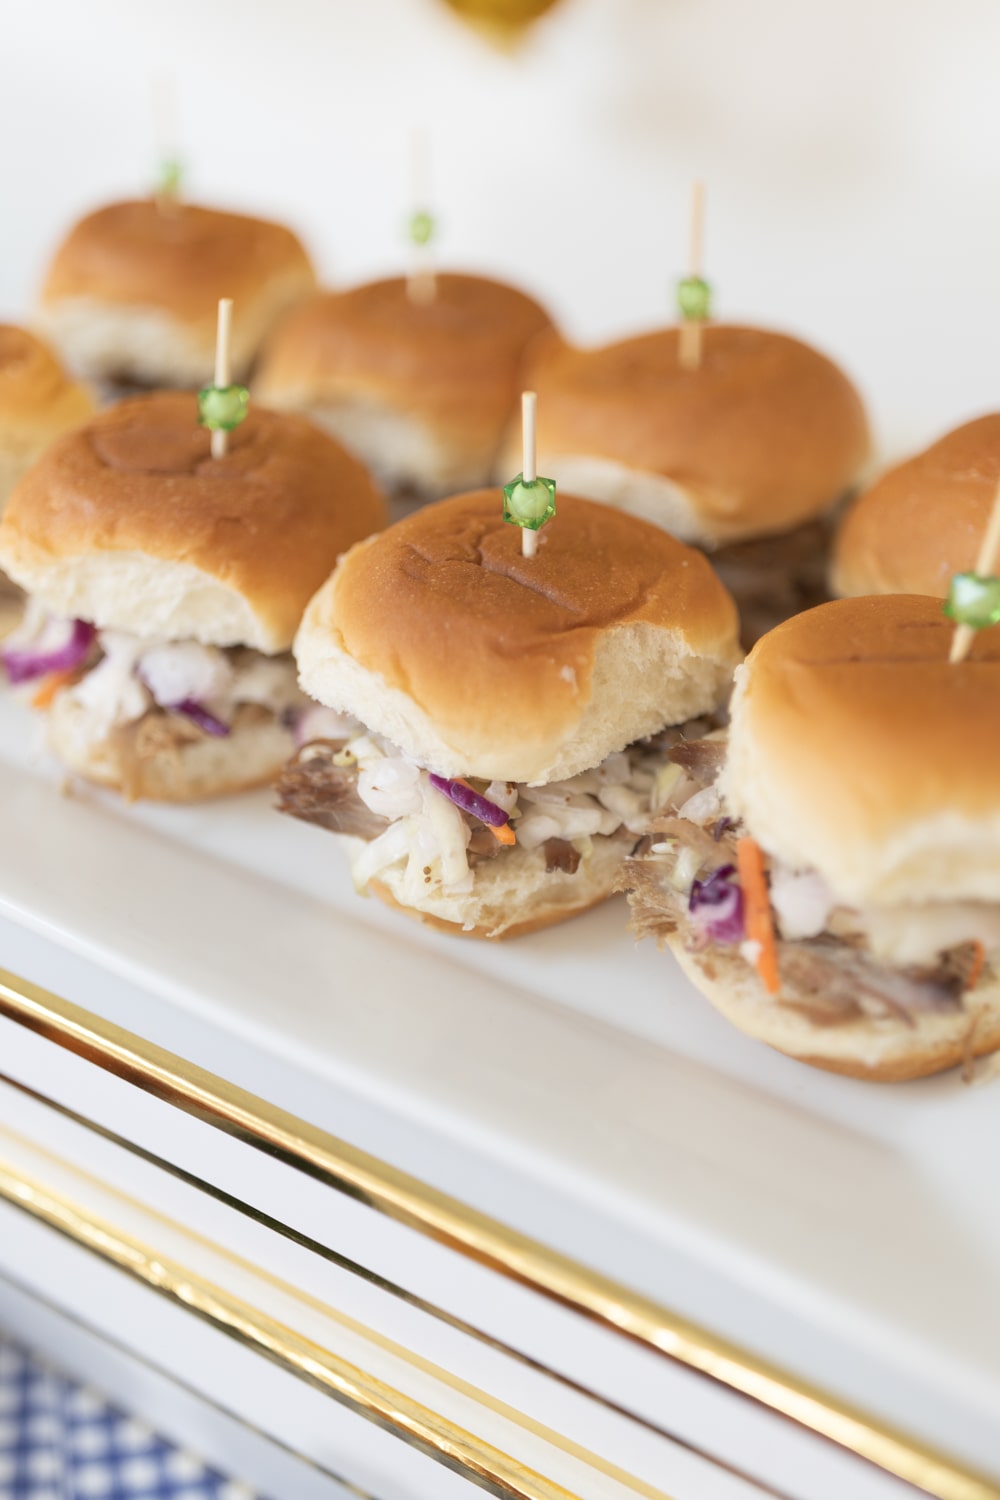 Game Day pulled pork sliders recipe by blogger Stephanie Ziajka on Diary of a Debutante